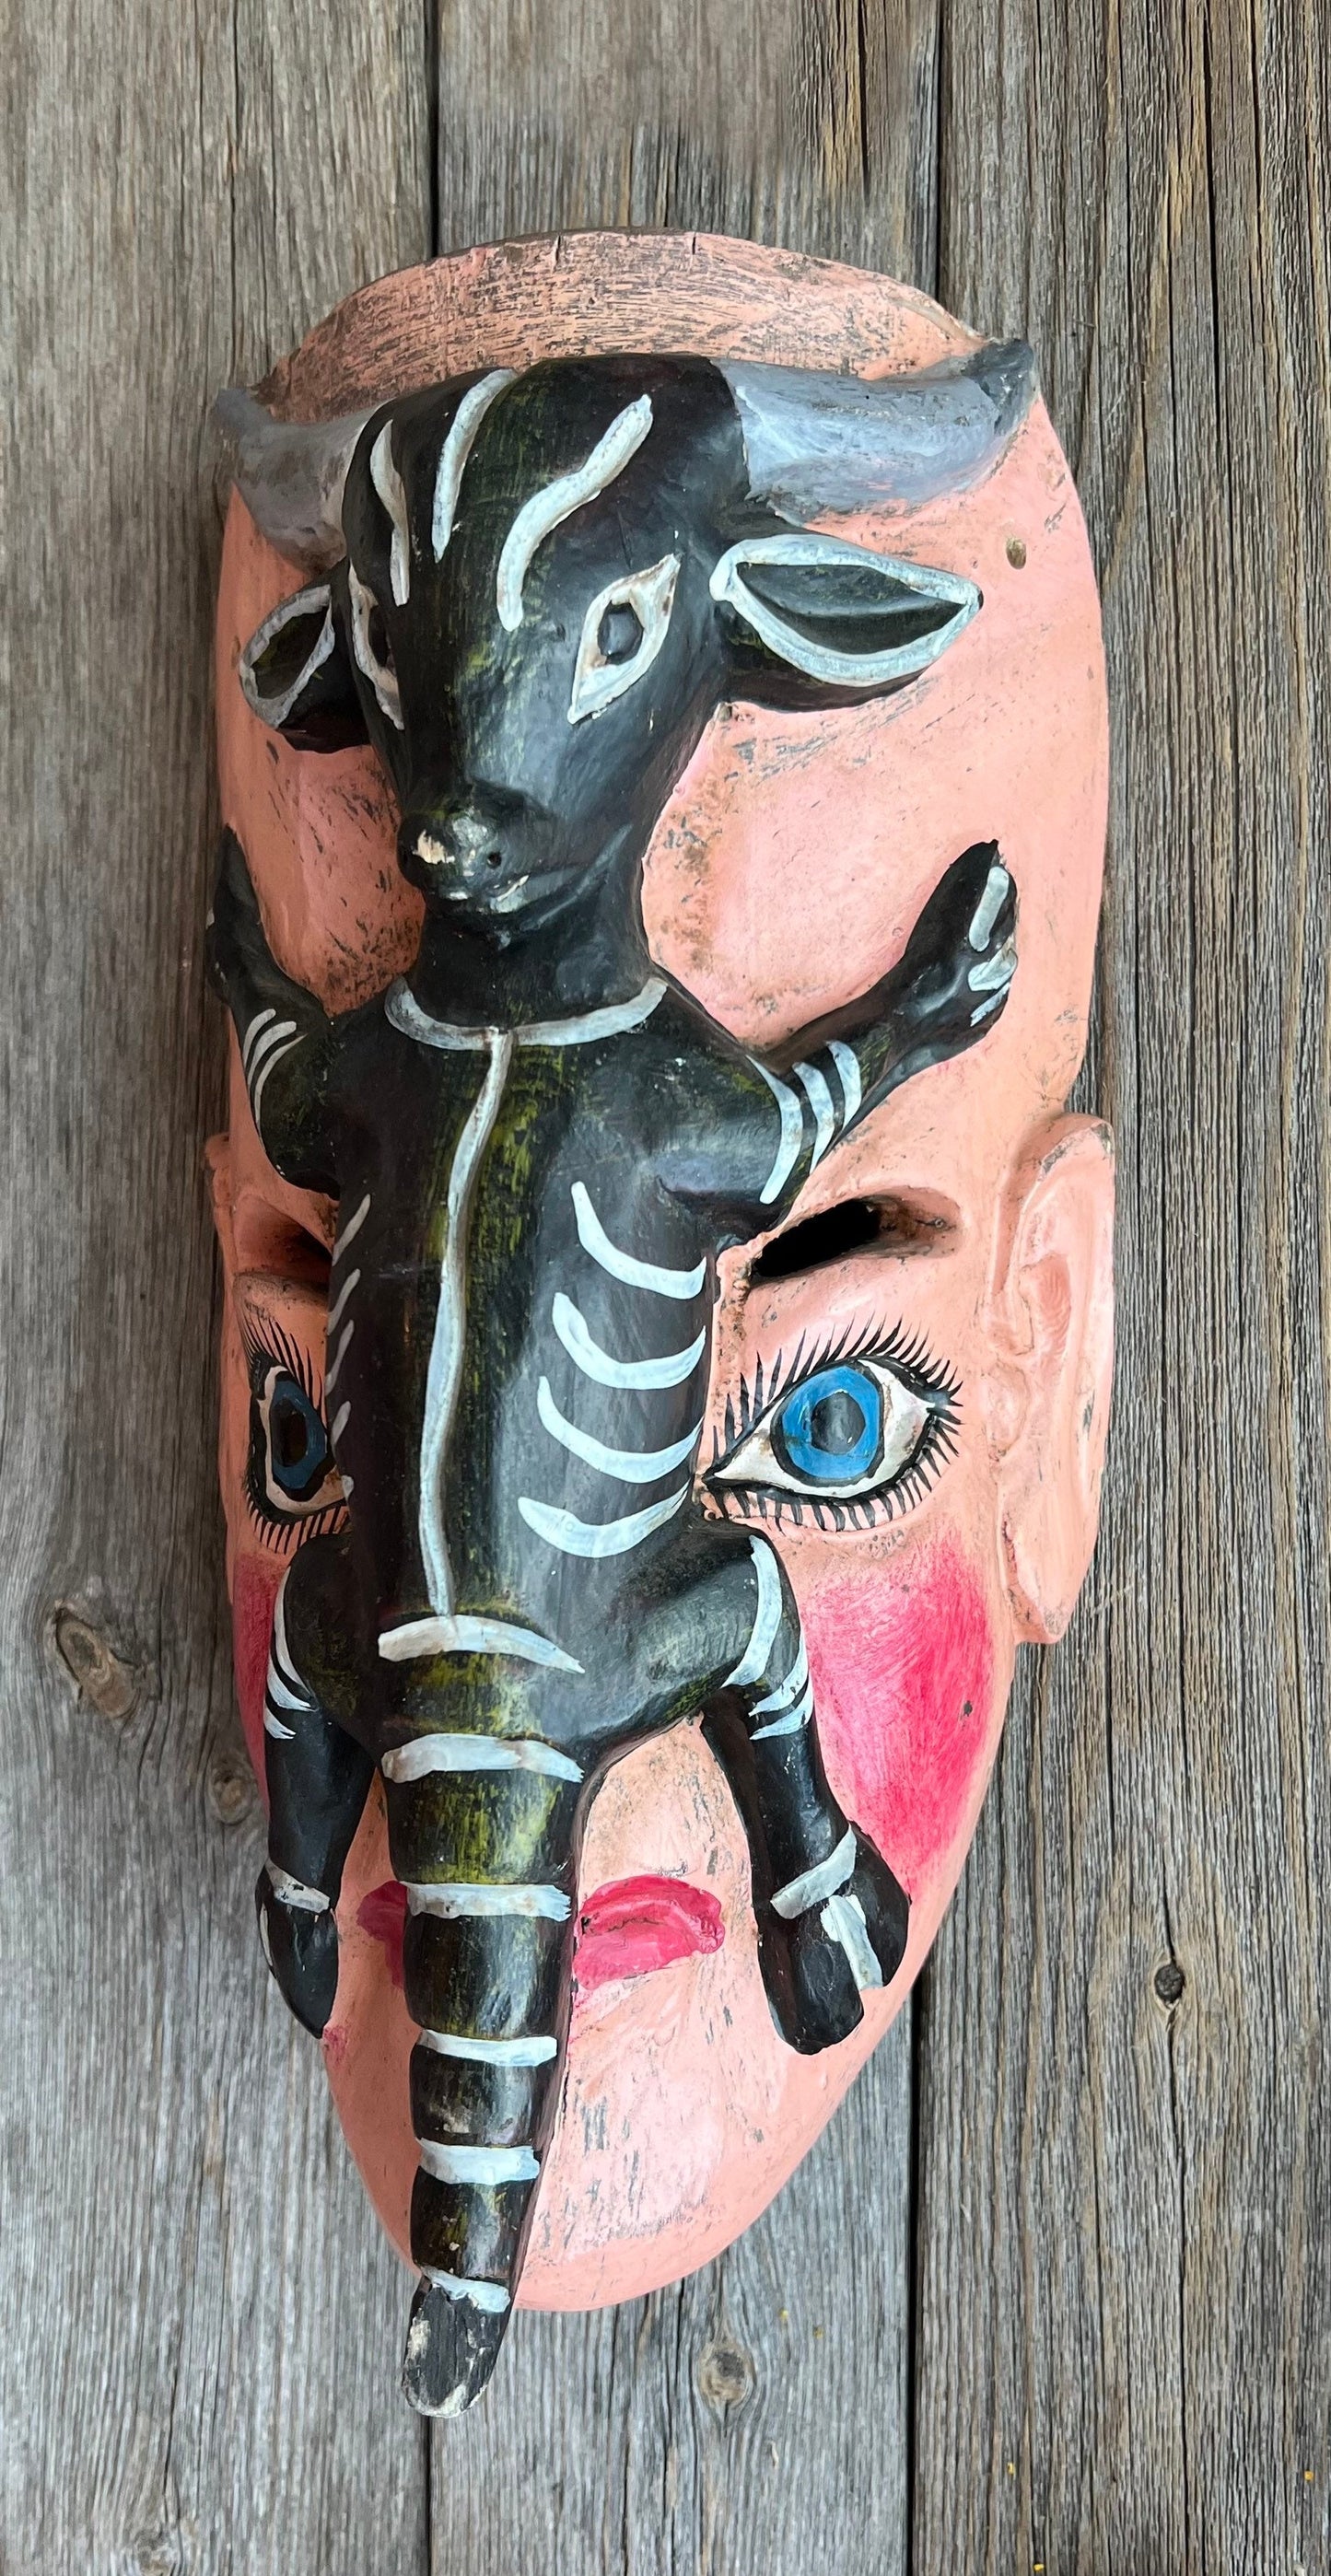 VERY RARE Vintage Goat on Face Altar Mask + Wood + Handcrafted in Mexico + Baphomet + One of a Kind!